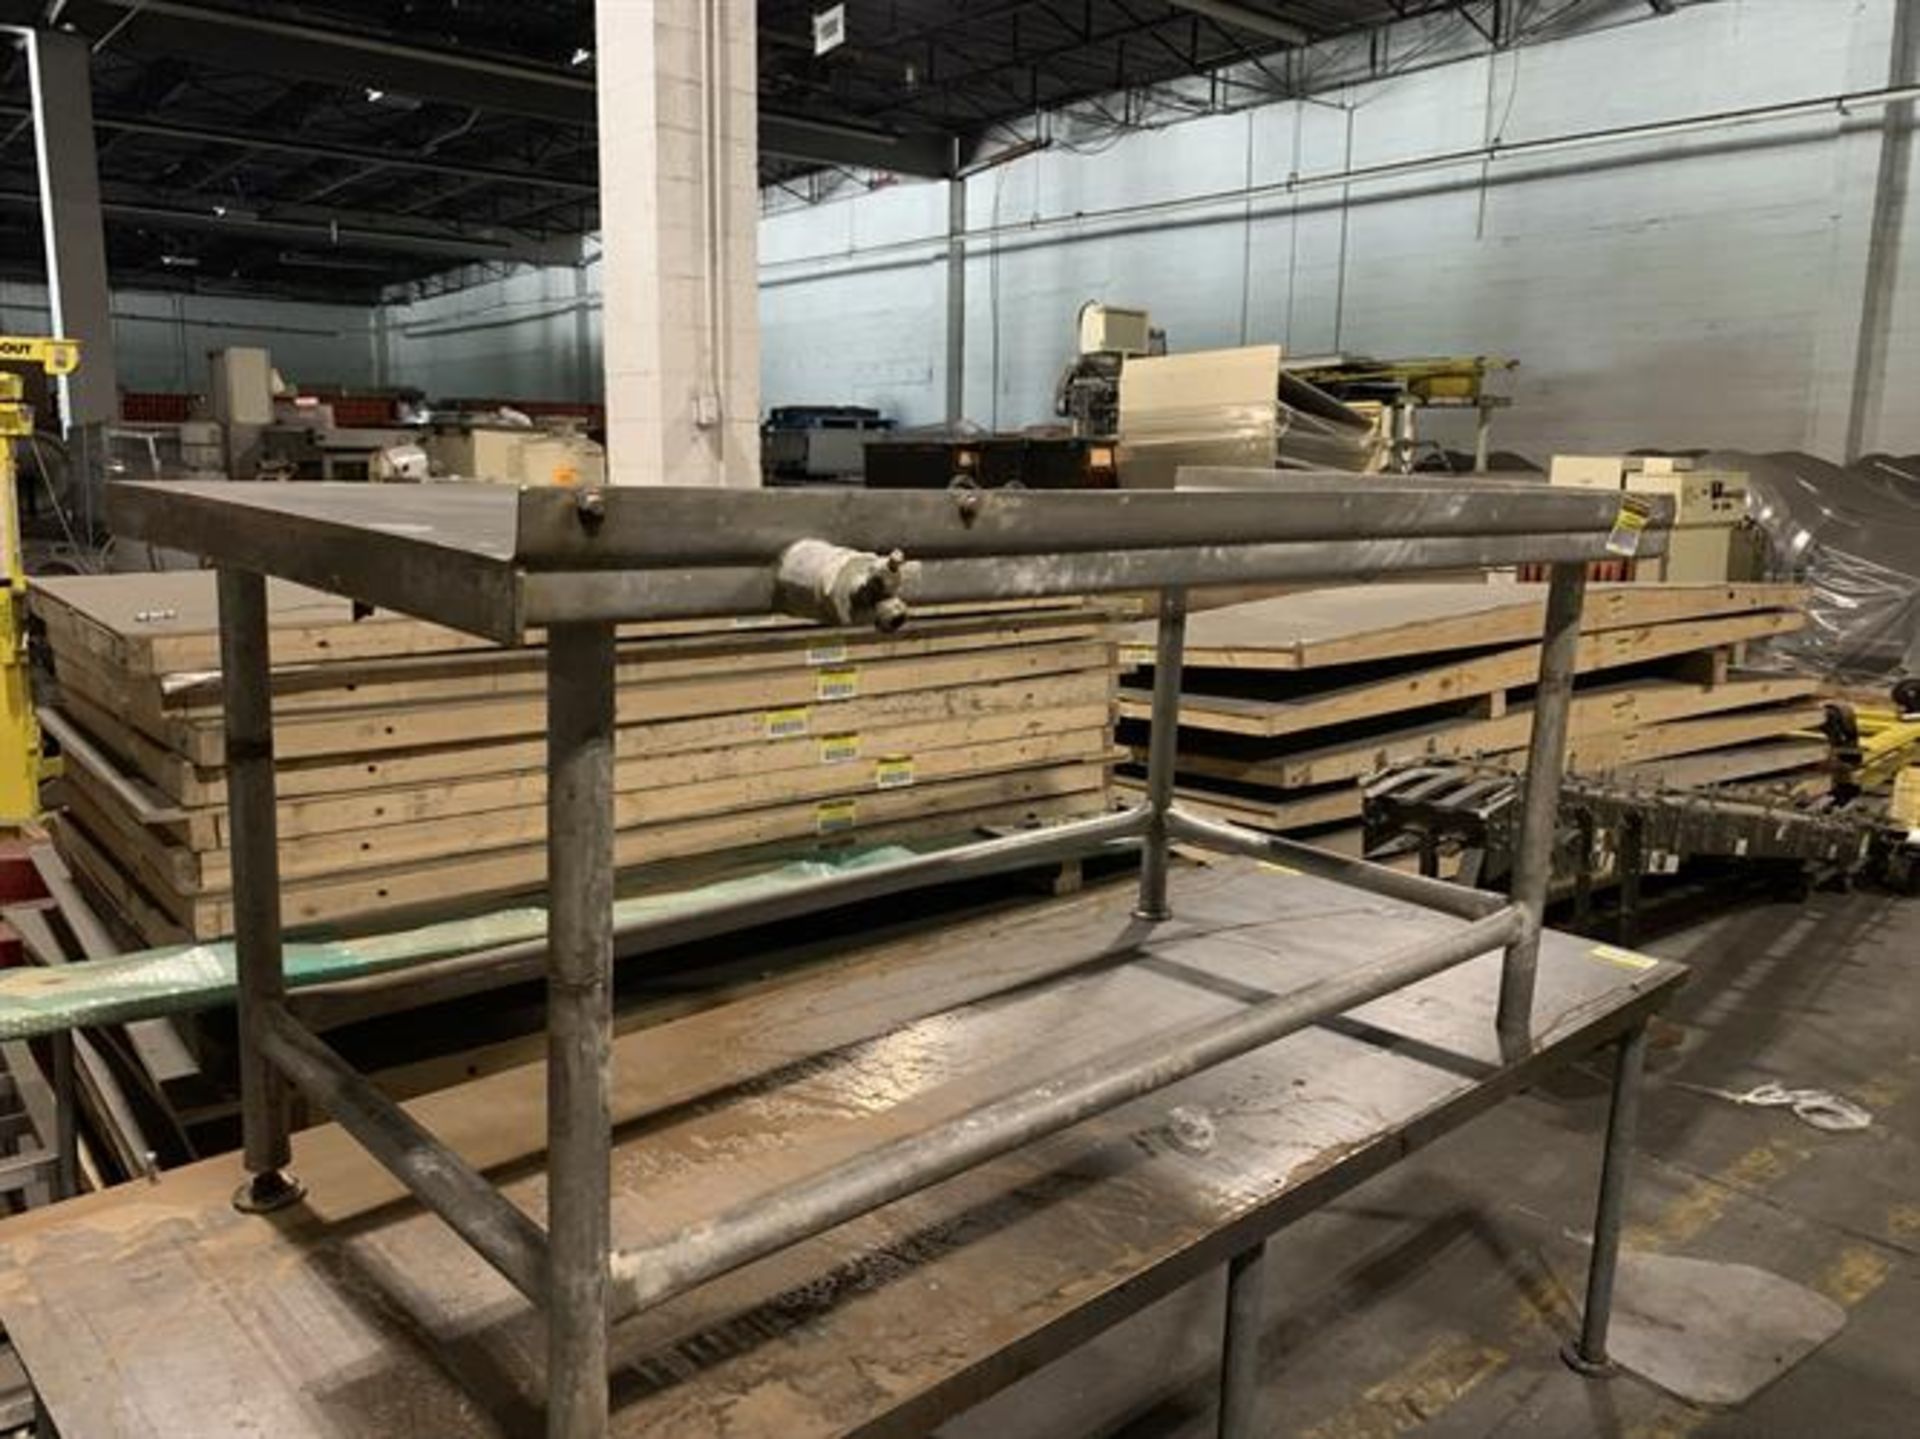 Stainless Steel 3 x 6 ft Water Cooled Table - 6' long x 3' wide x 32" high - Water jacketed. Located